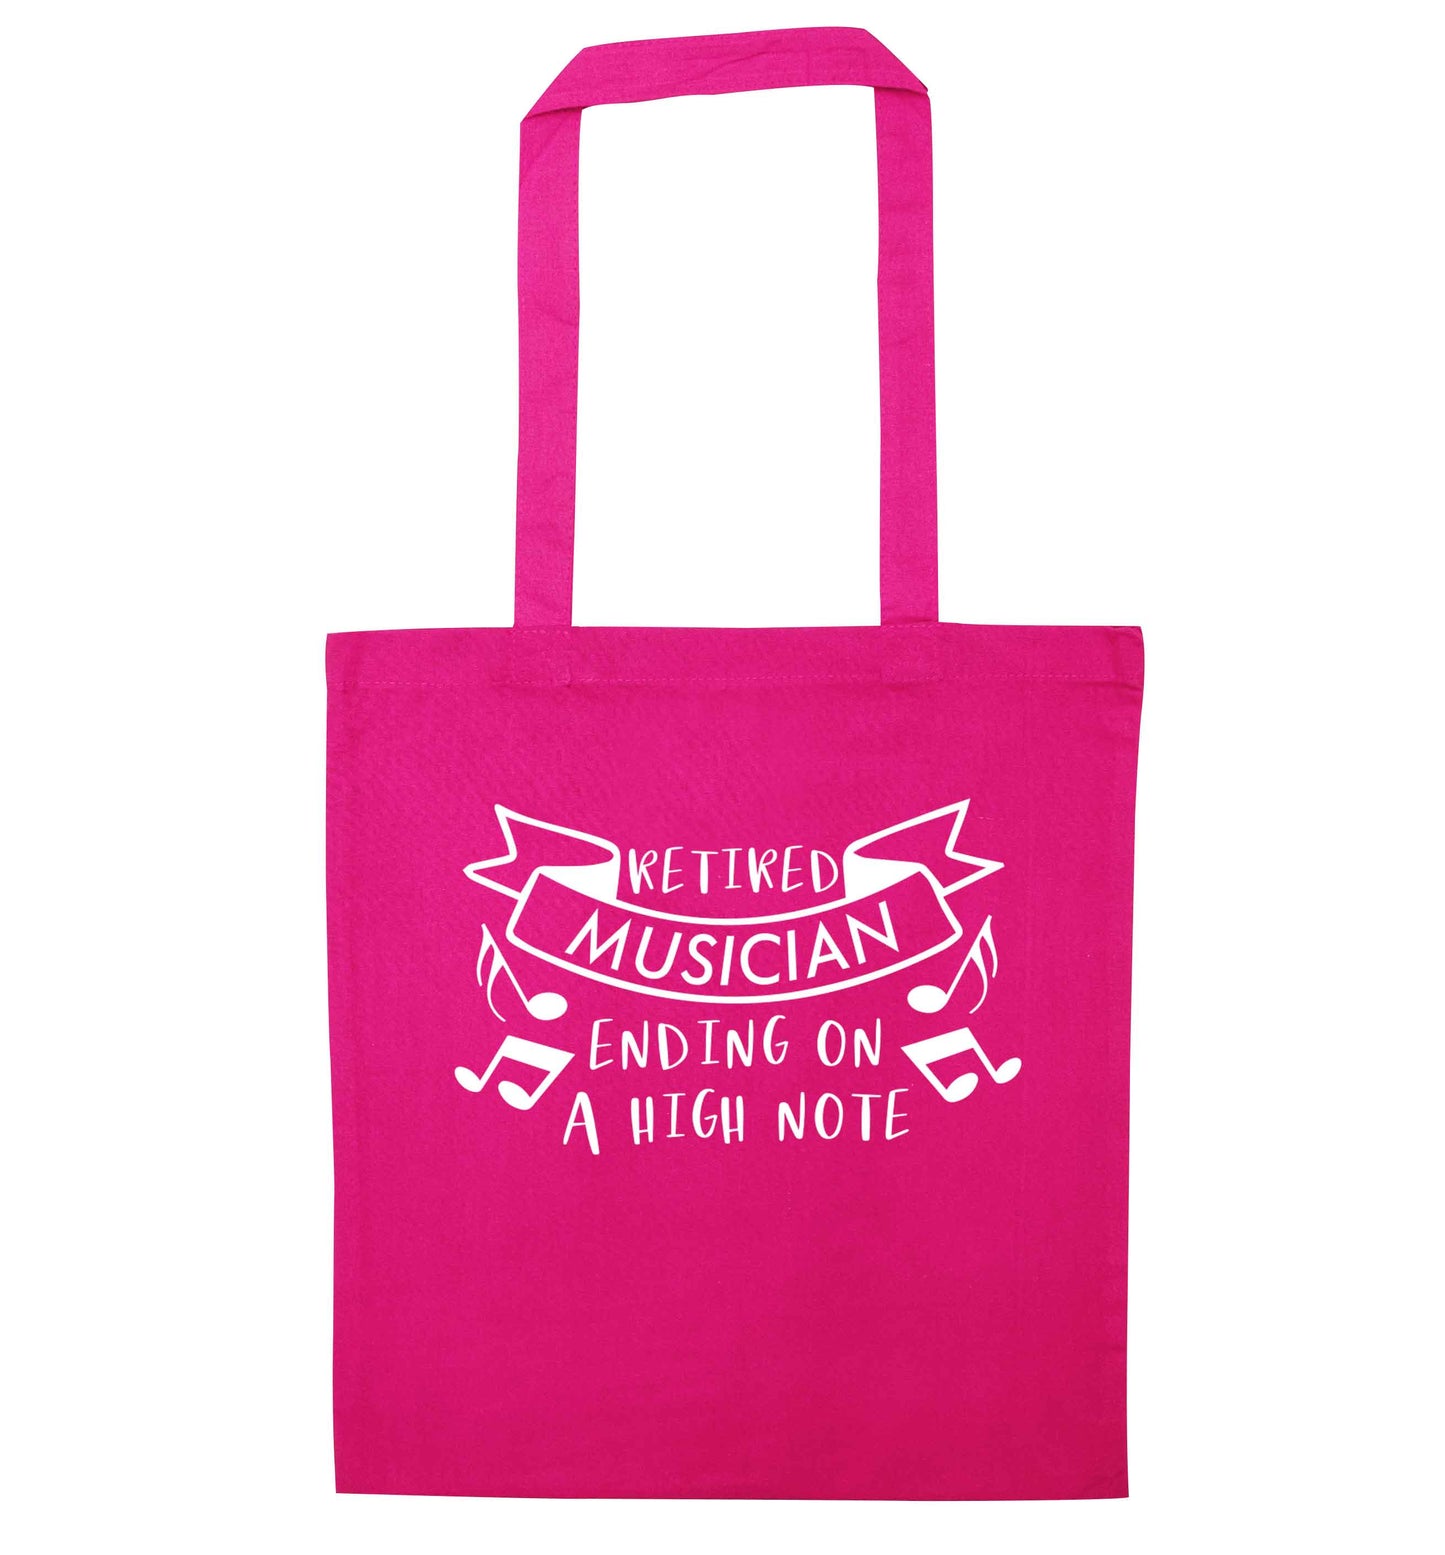 Retired musician ending on a high note pink tote bag